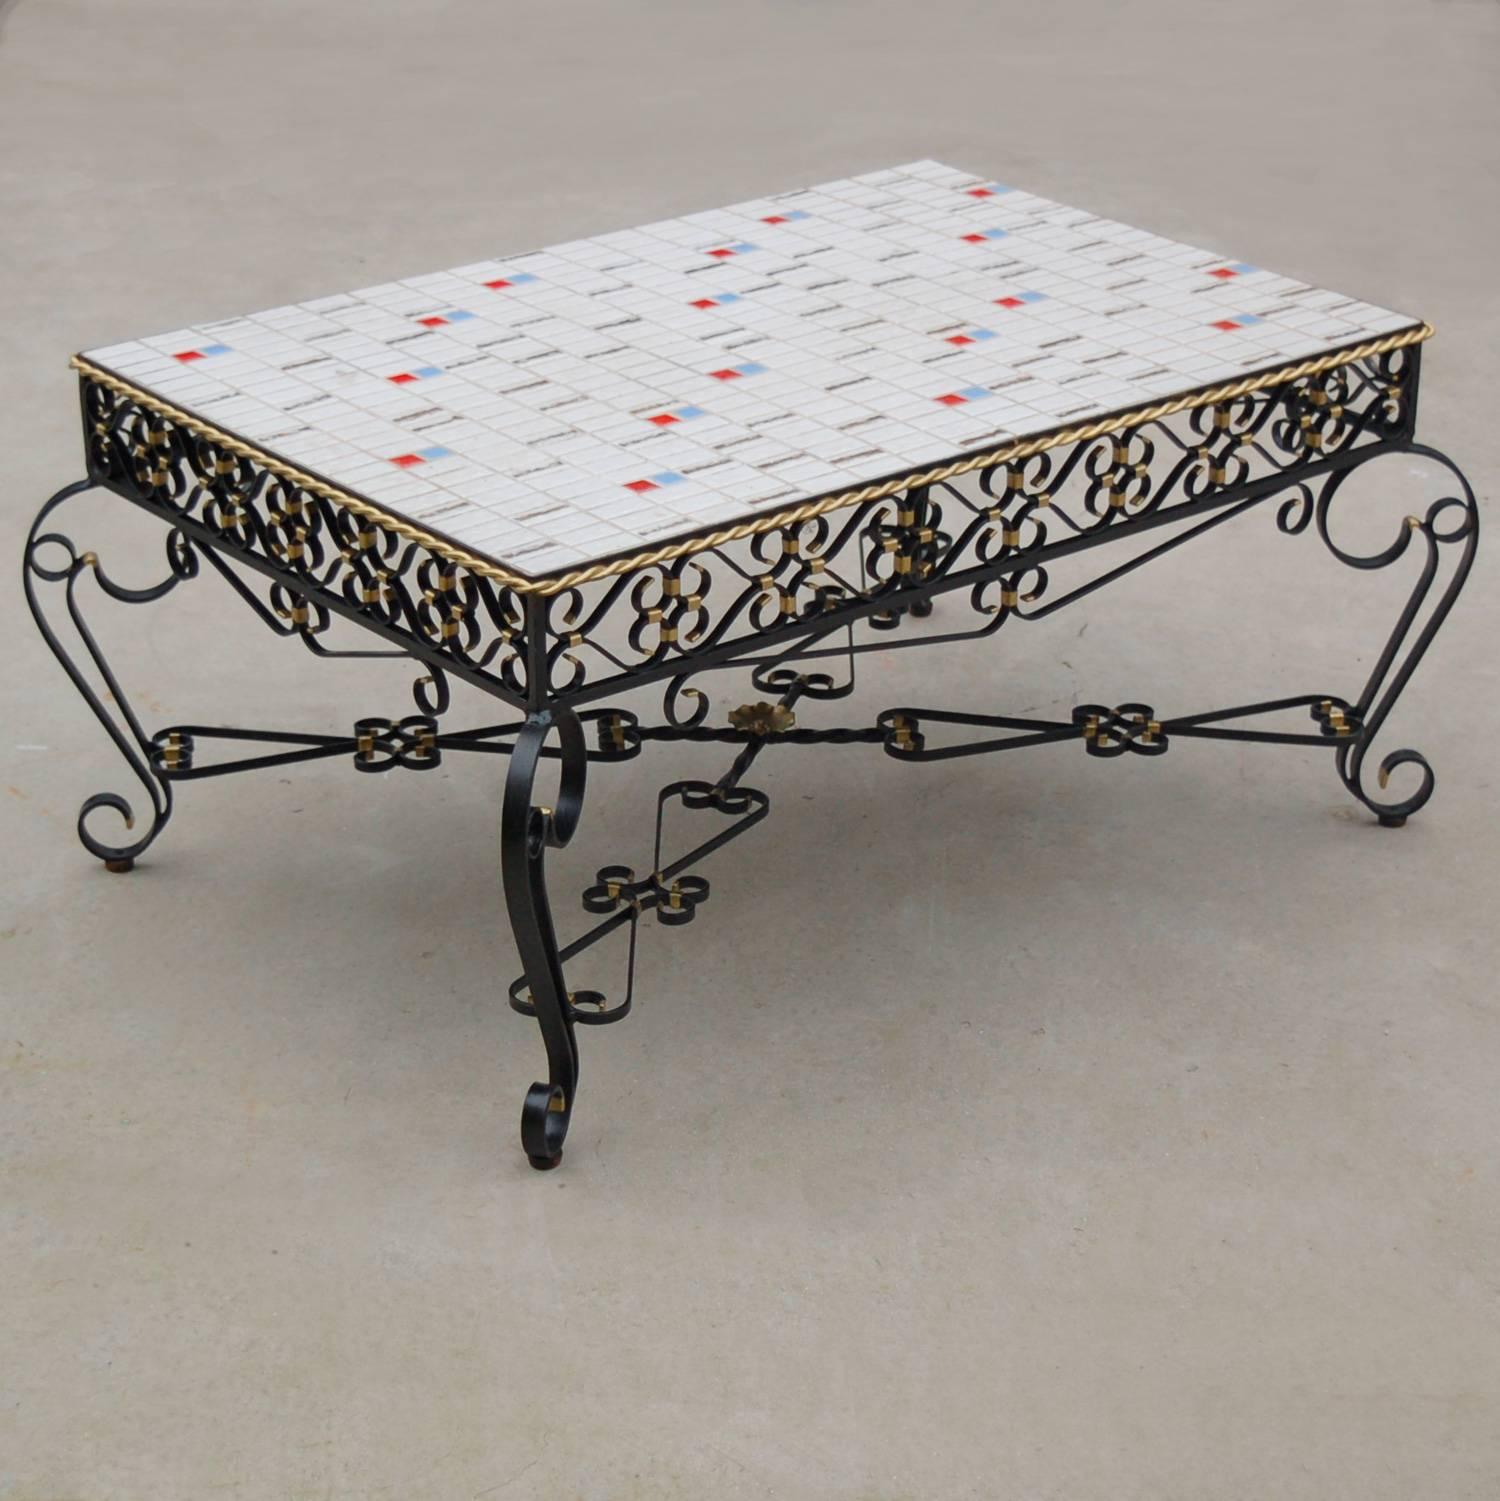 A distinctive rectangular coffee table with mosaic tiled top which rests on a wrought metal frame with elaborate black lacquered scrollwork finished with gold colored highlights and rope edging. The tabletop is decorated with miniature textured